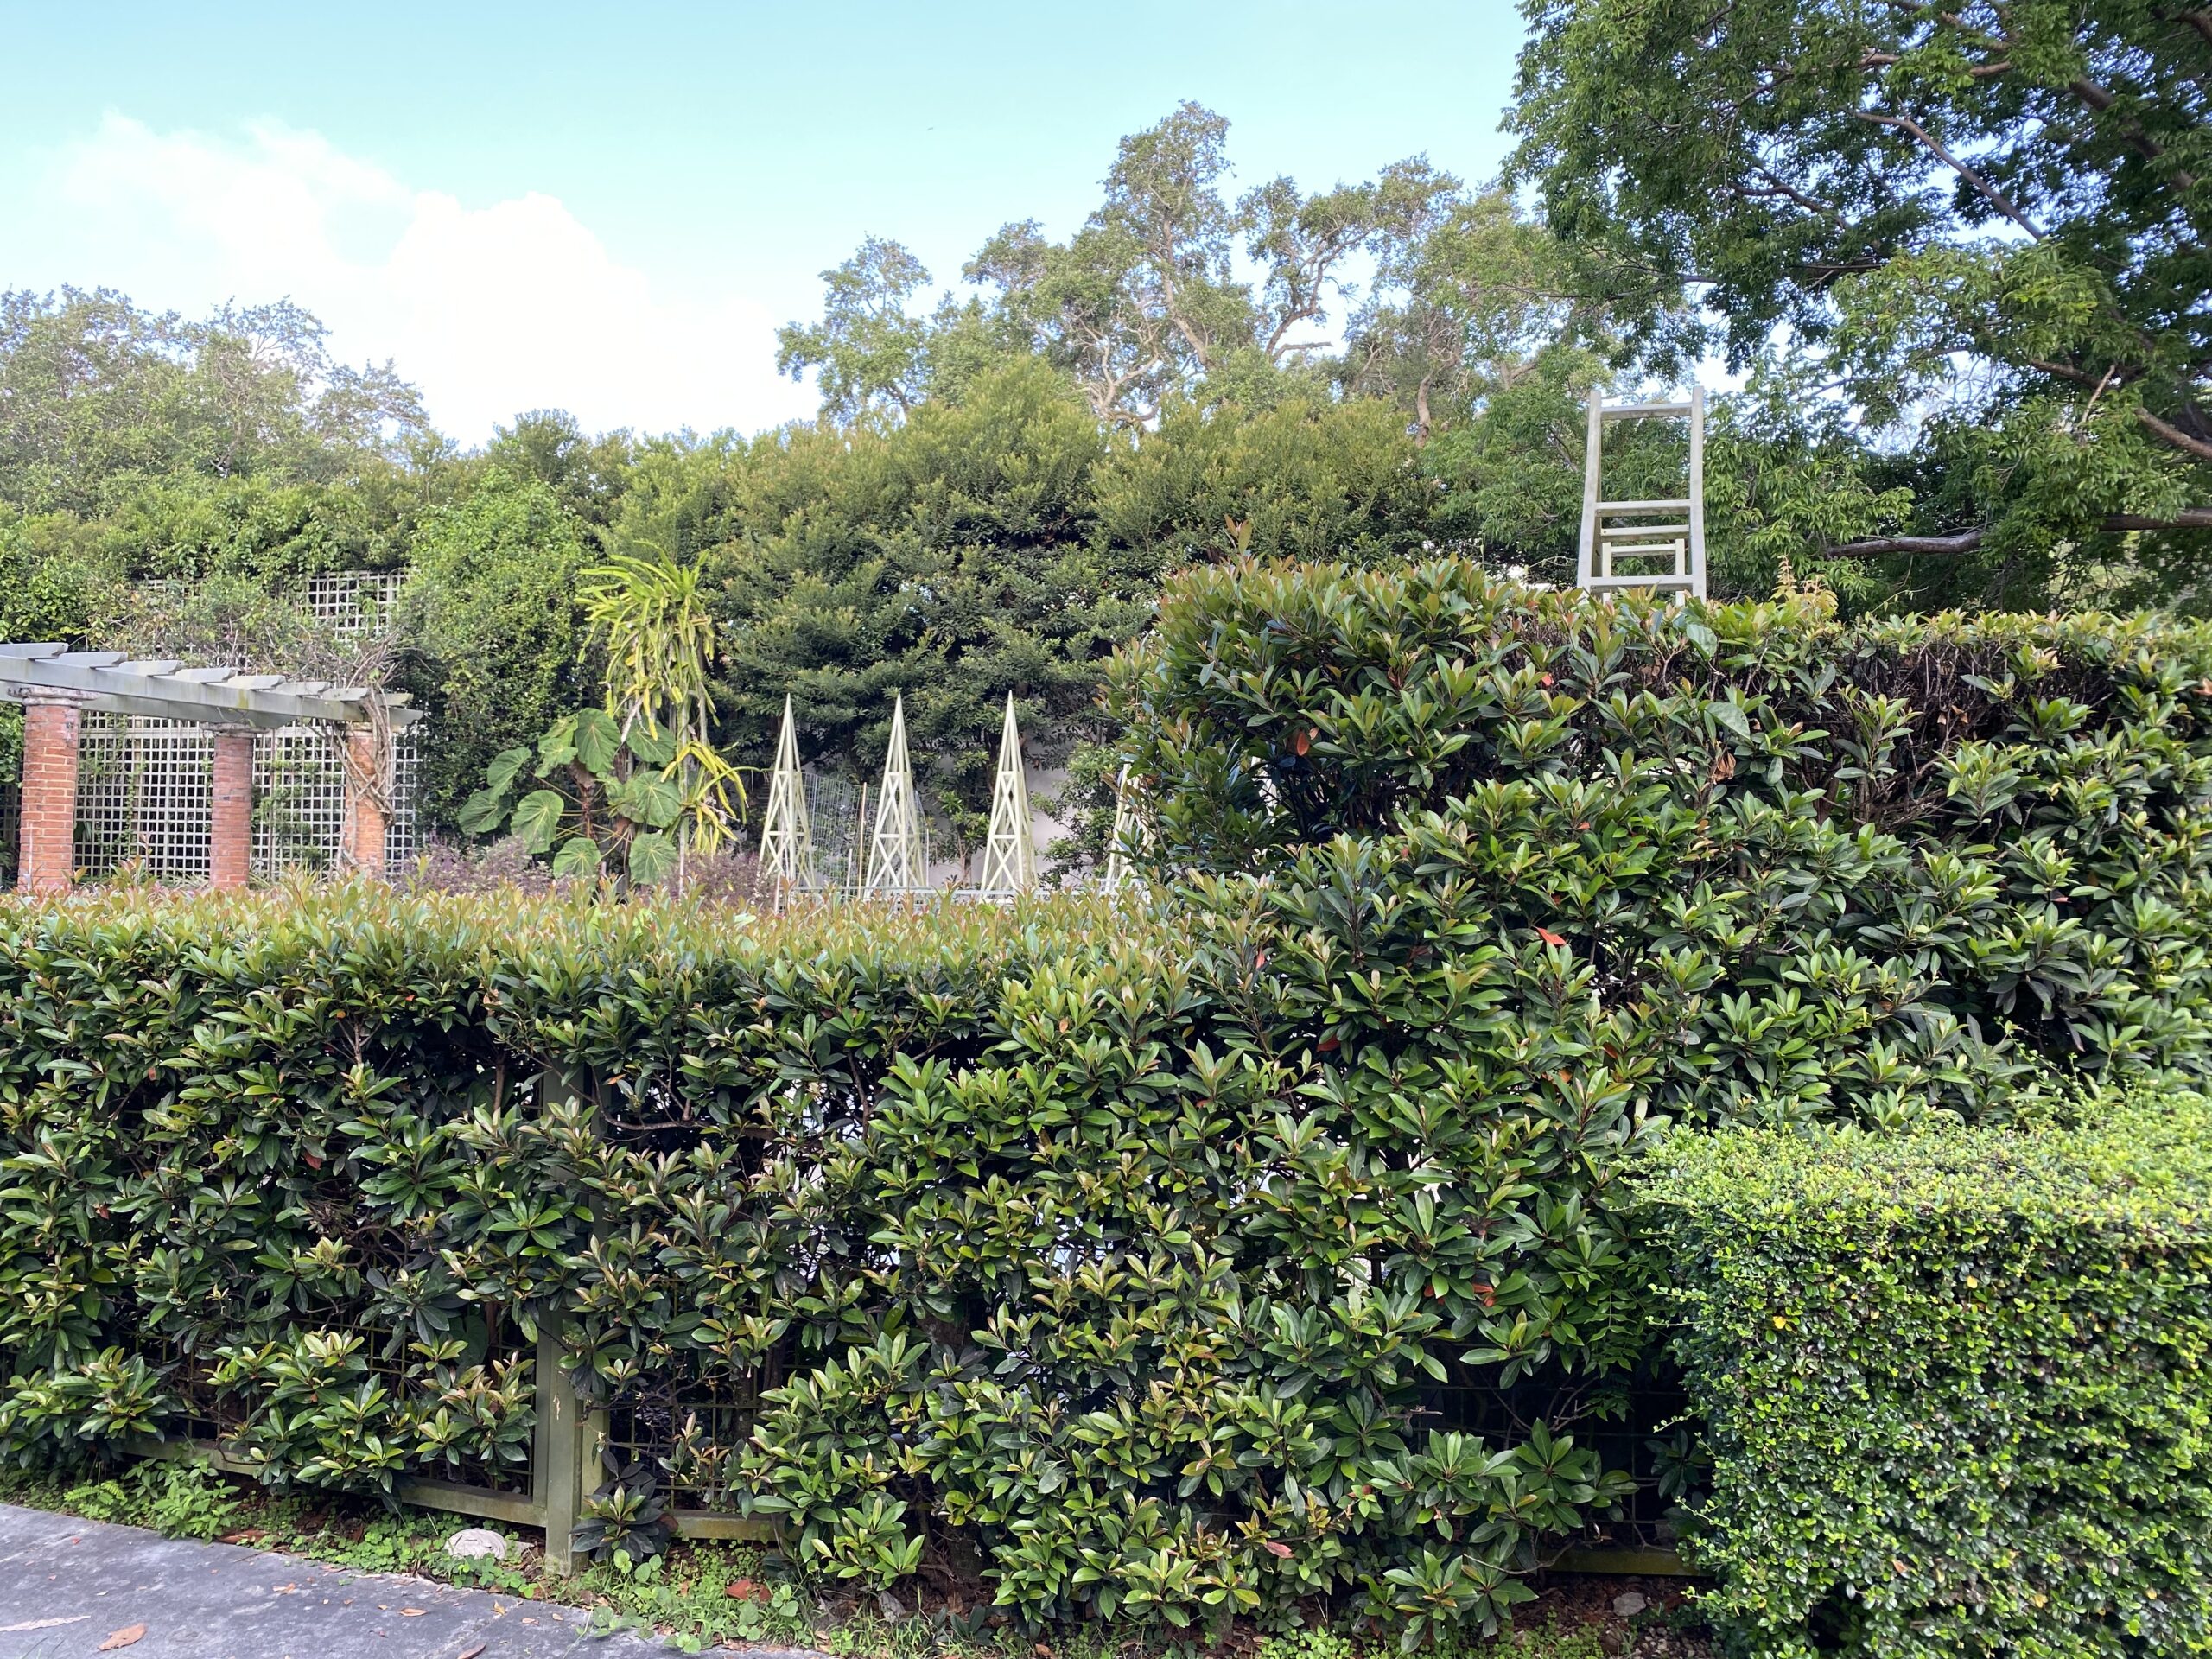 Hedges of various sizes surrounding the garden